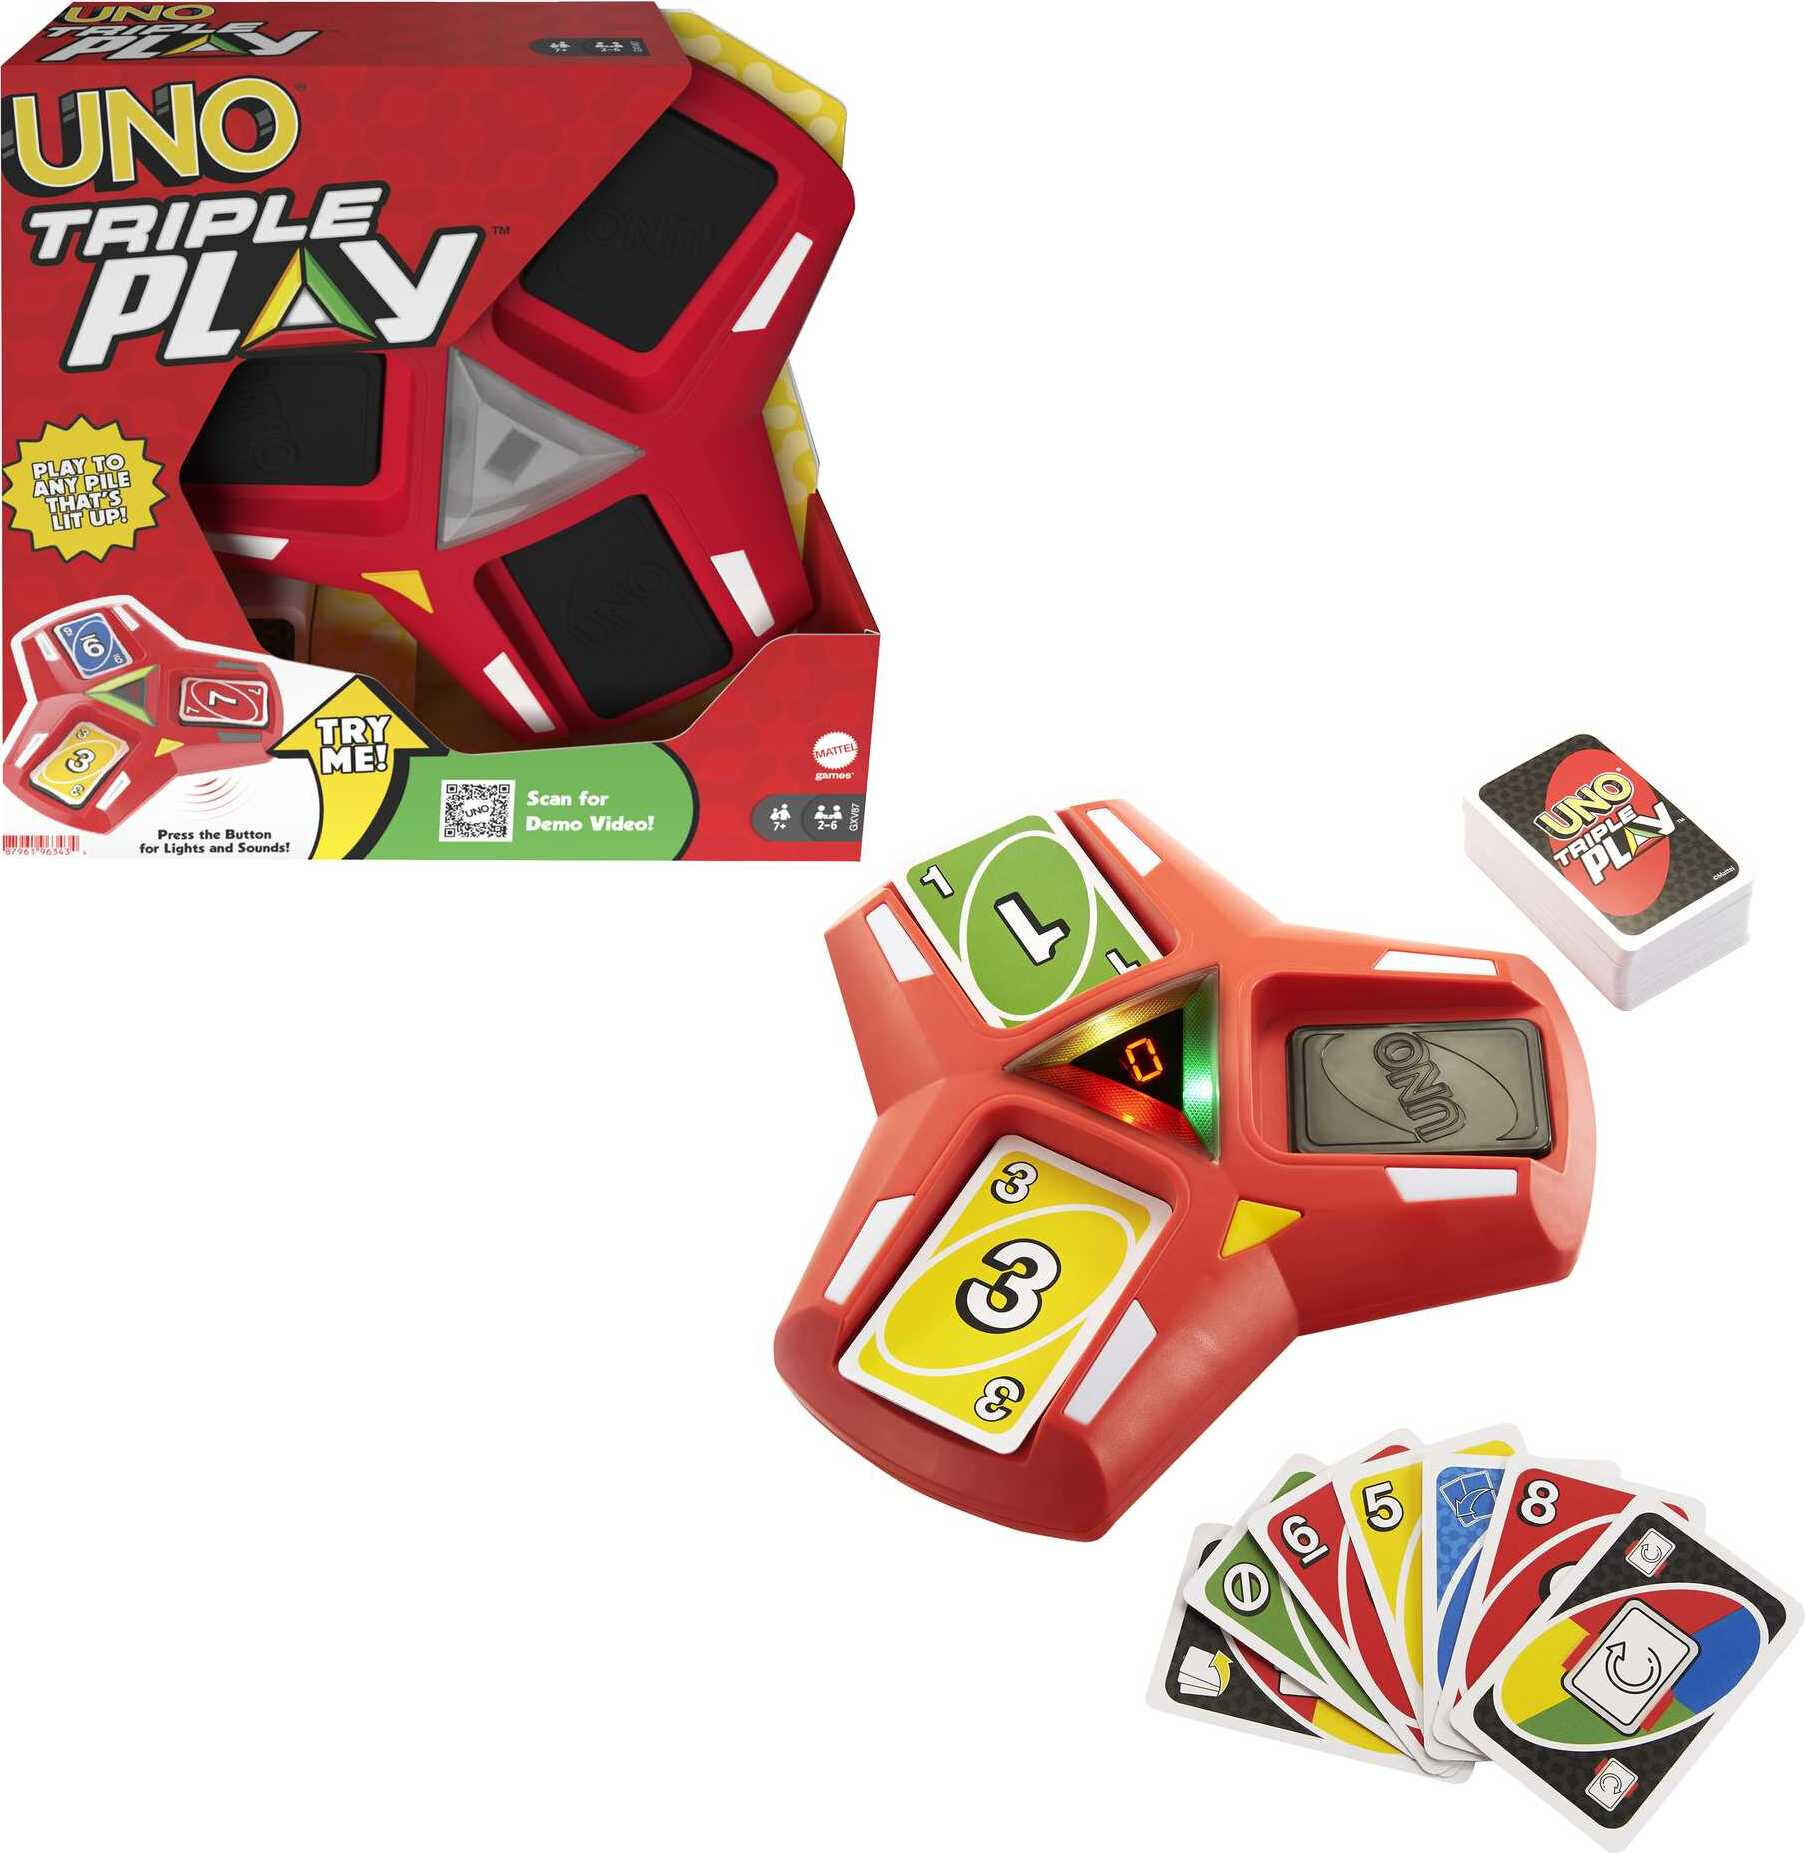 UNO Triple Play Card Game for Family Night Featuring 3 Discard Piles, Lights & Sounds - image 1 of 8